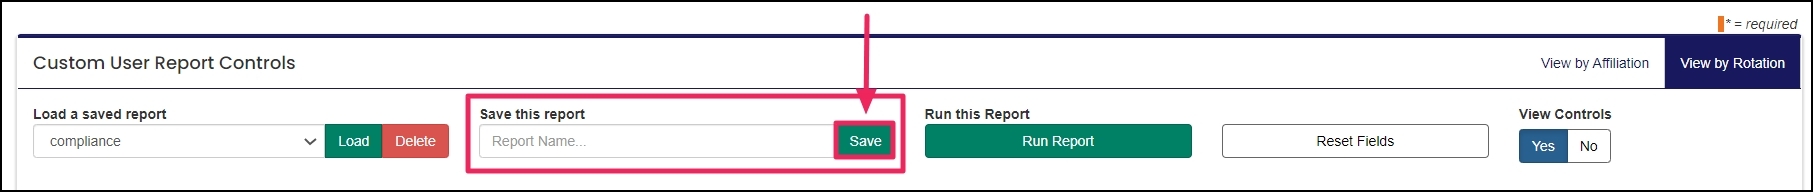 image with an arrow pointing to the save button under the "save this report" field